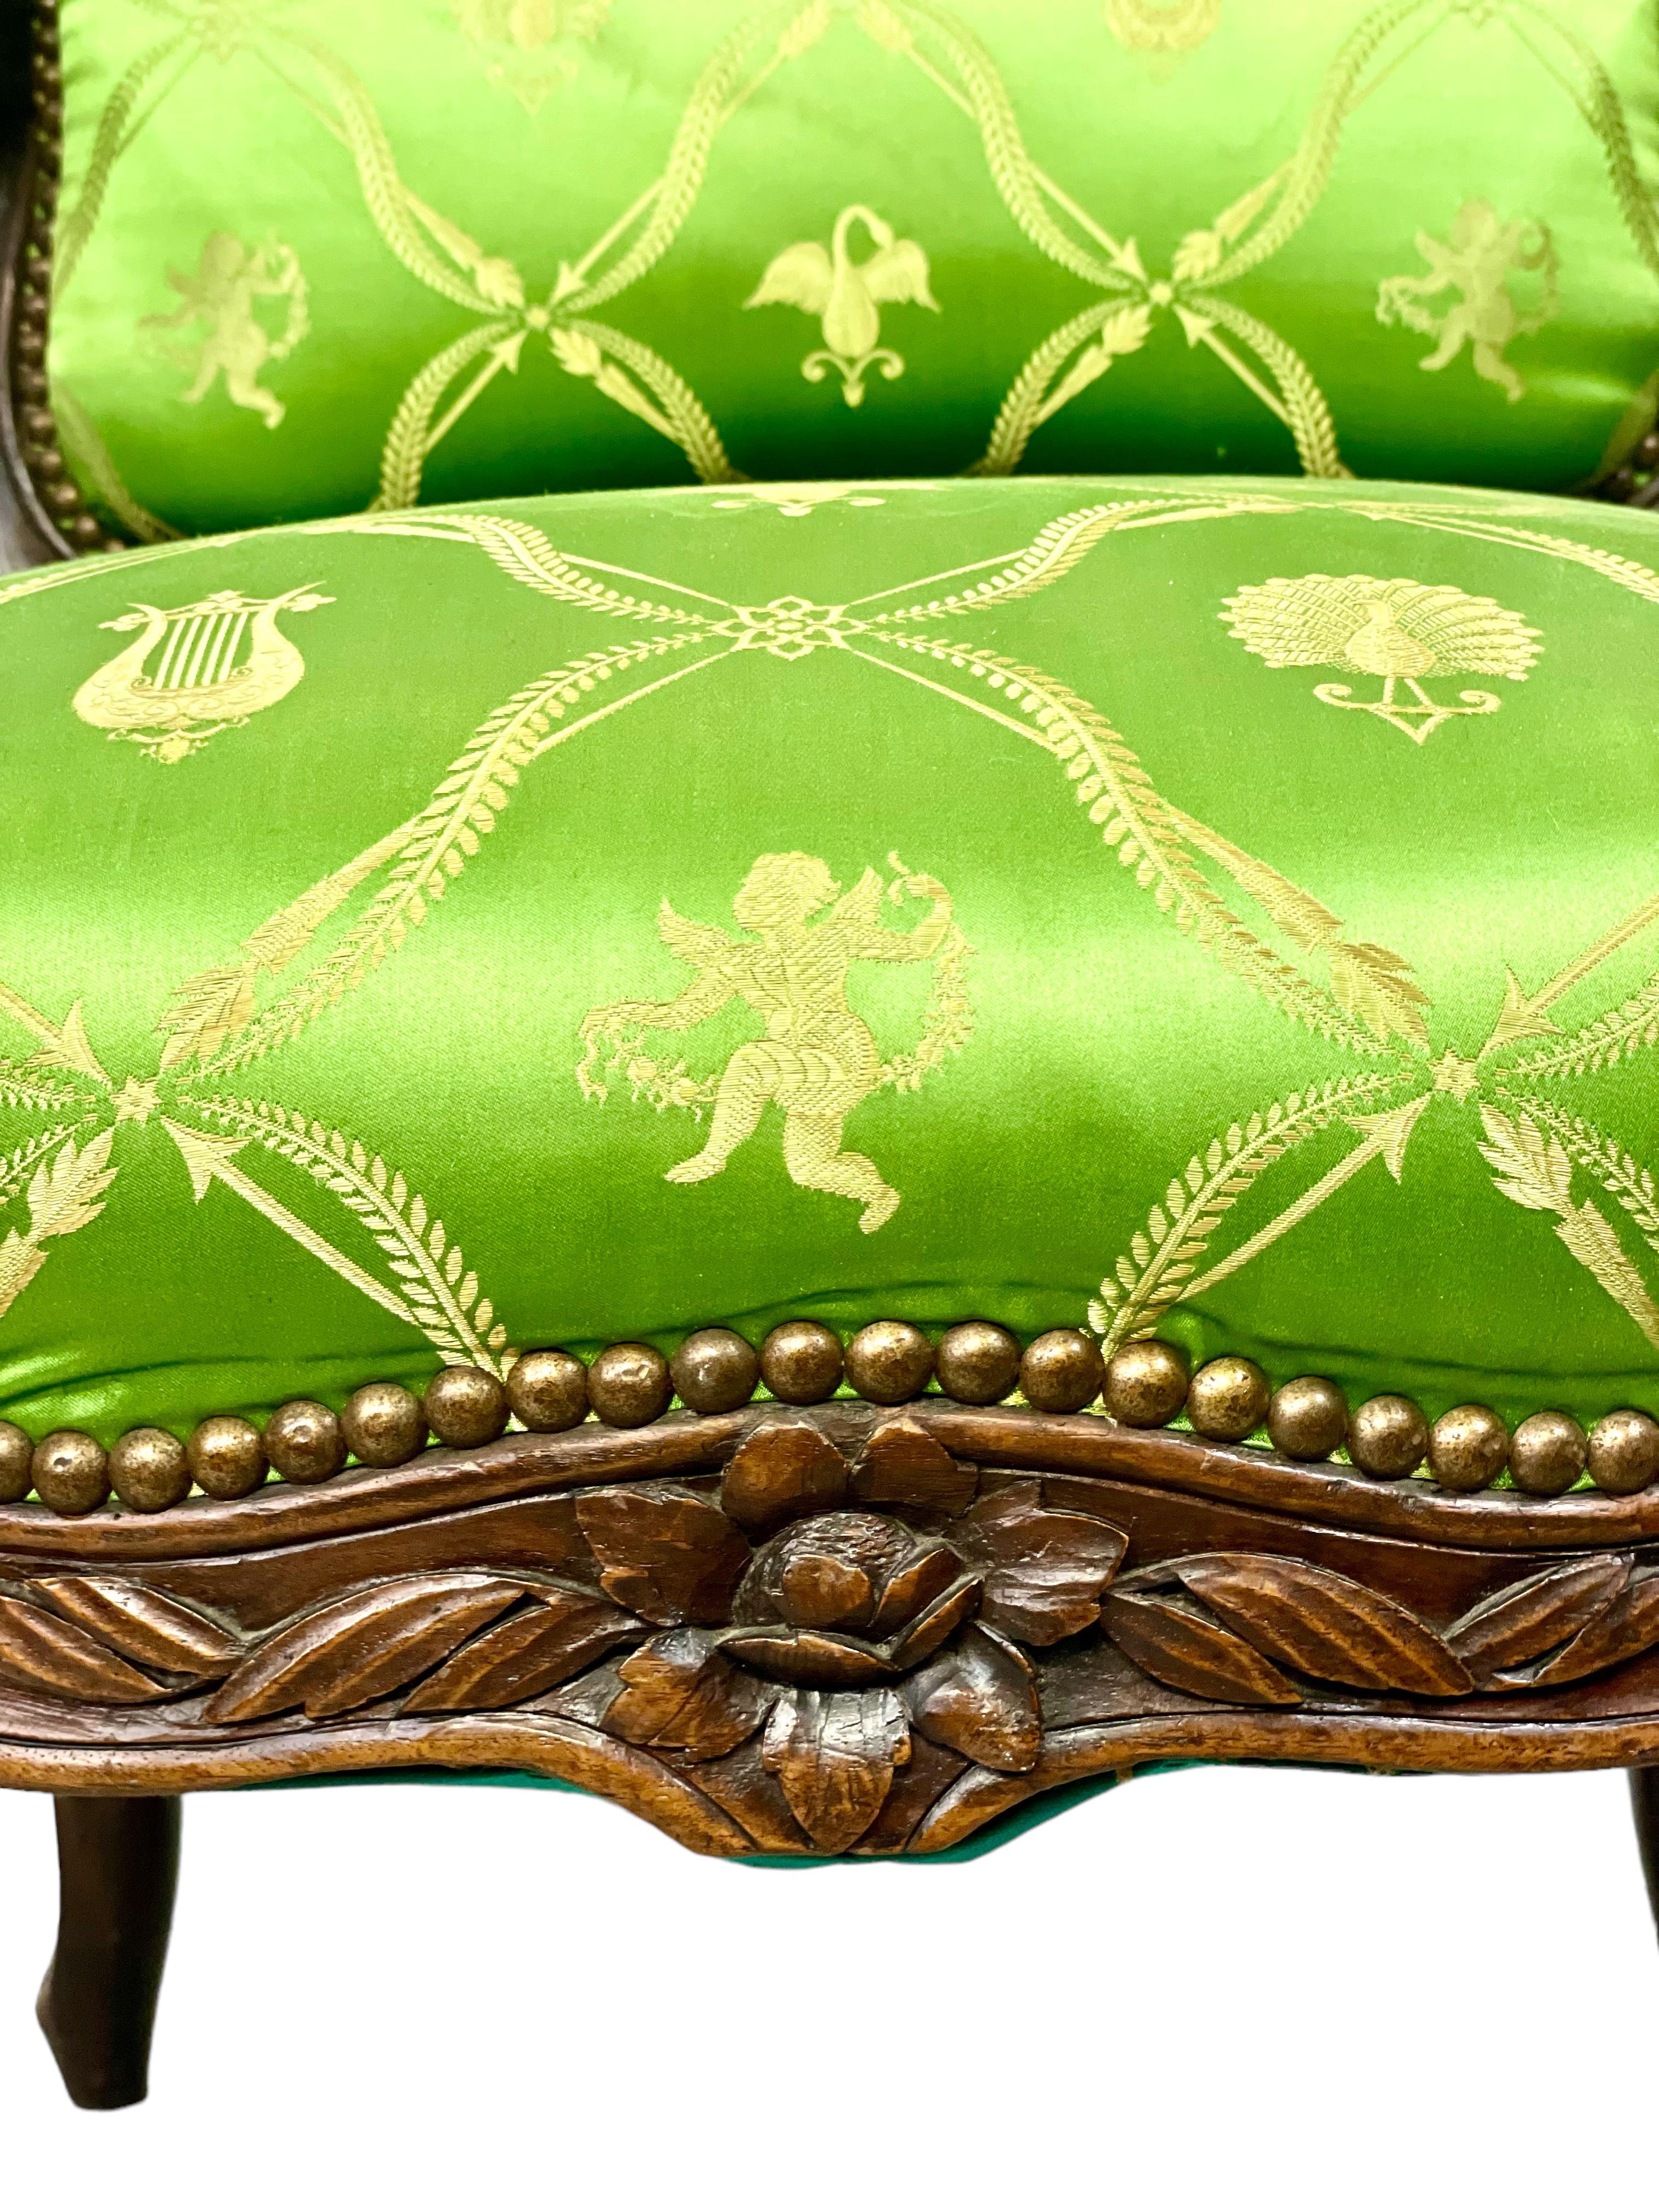 A wide and comfortable Louis XV style fauteuil 'à la reine', hand carved in the 18th century and featuring exquisite green silk upholstery woven with neoclassical motifs of lyres, cherubs, peacocks and swans. The shoulder-high back rest and